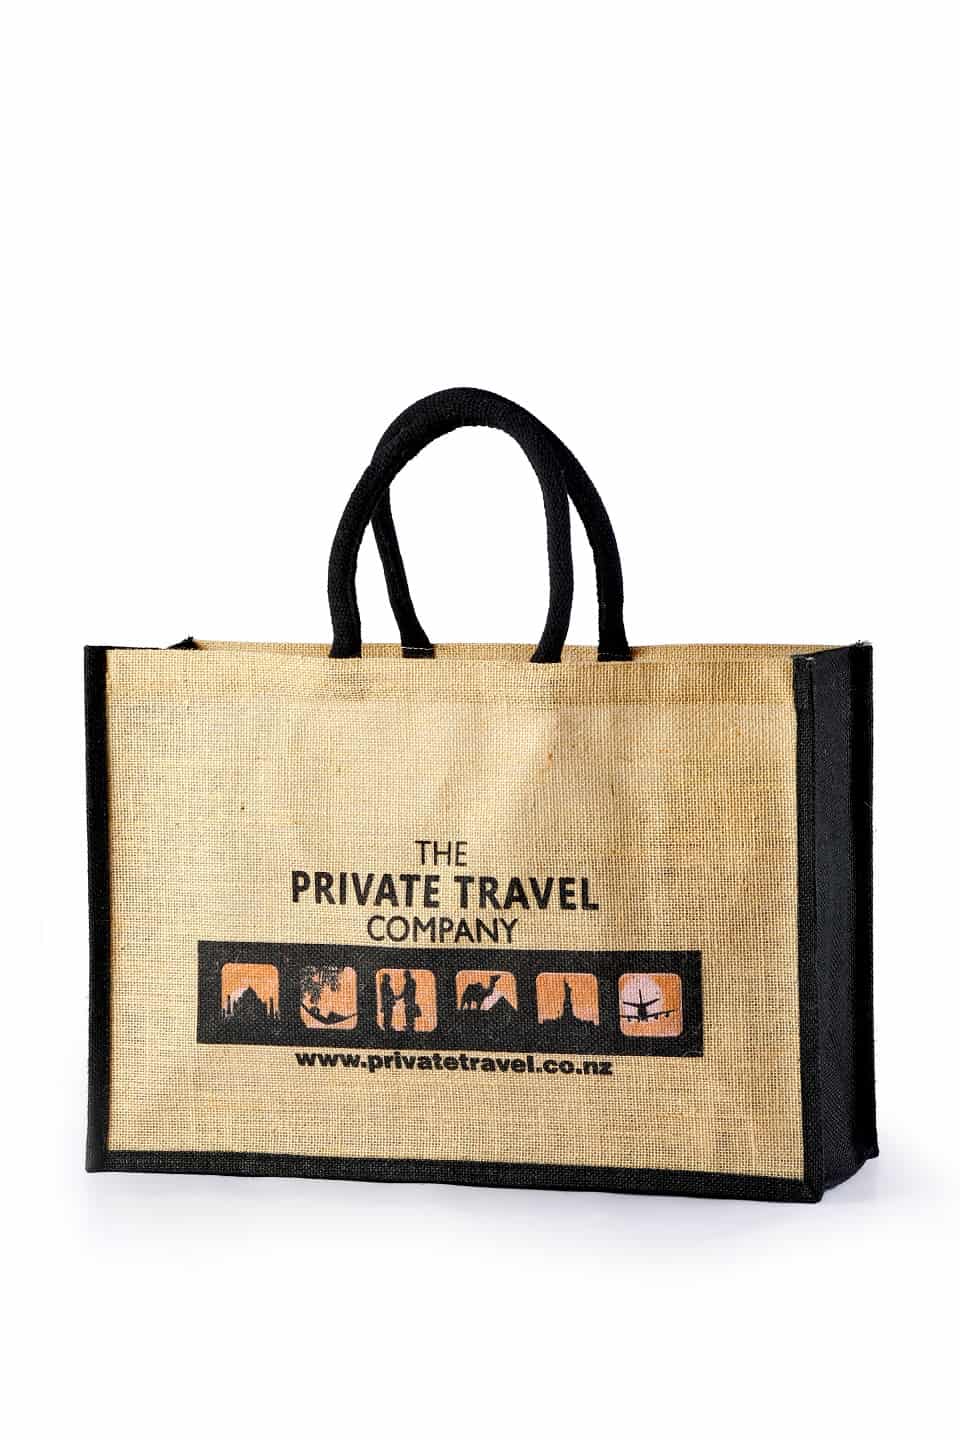 Canvas Tote Bags Manufacturer and Exporter from Kolkata India